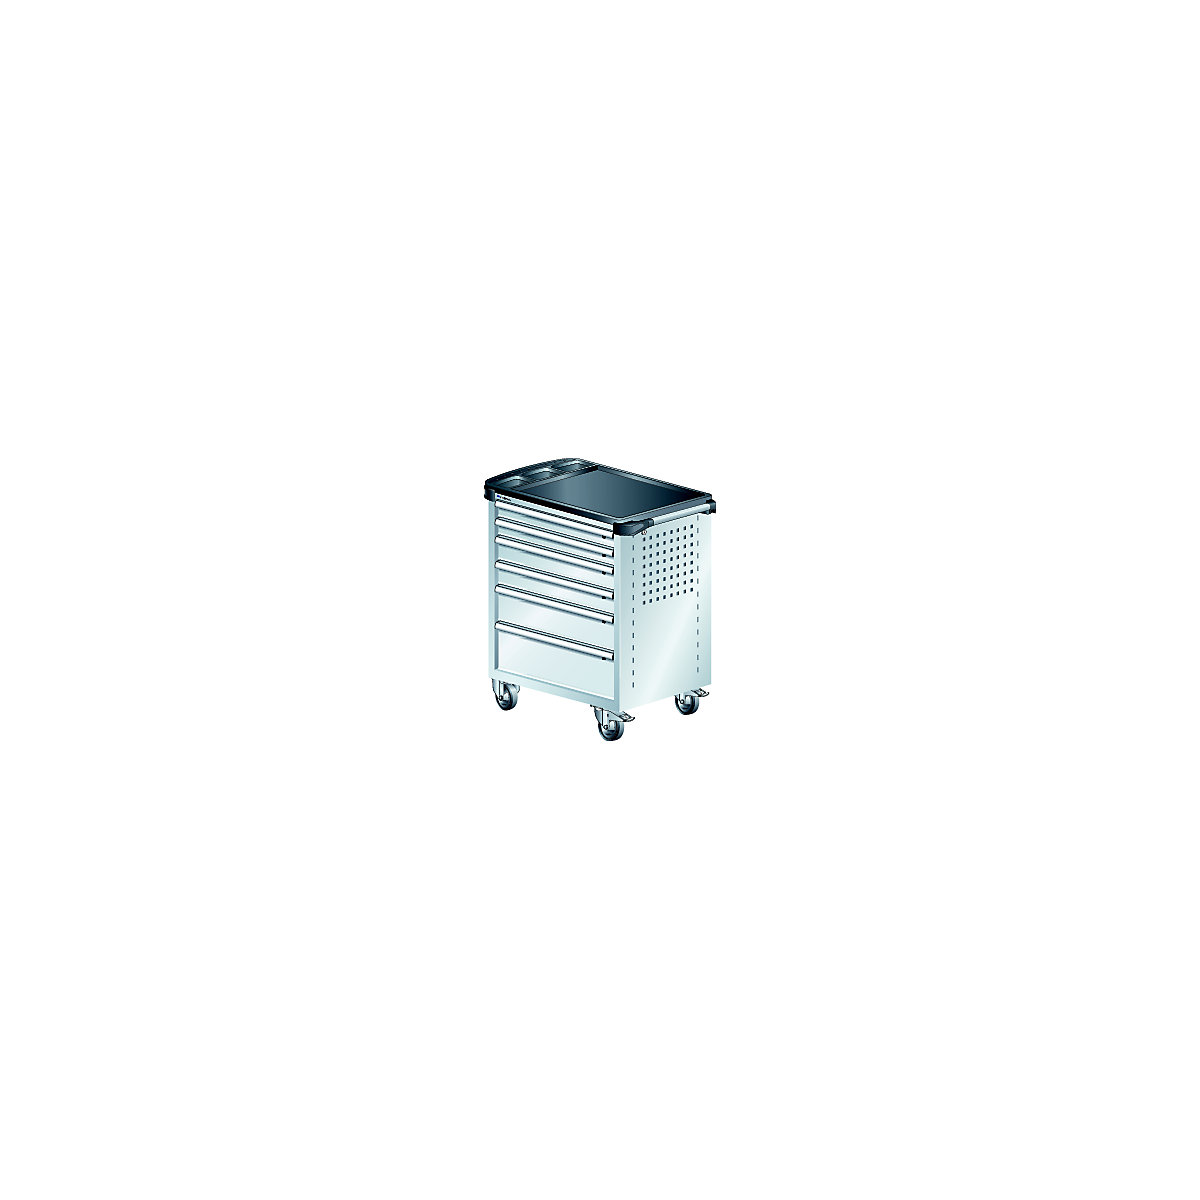 Workshop trolley – LISTA, with plastic cover, 6 drawers, grey-4